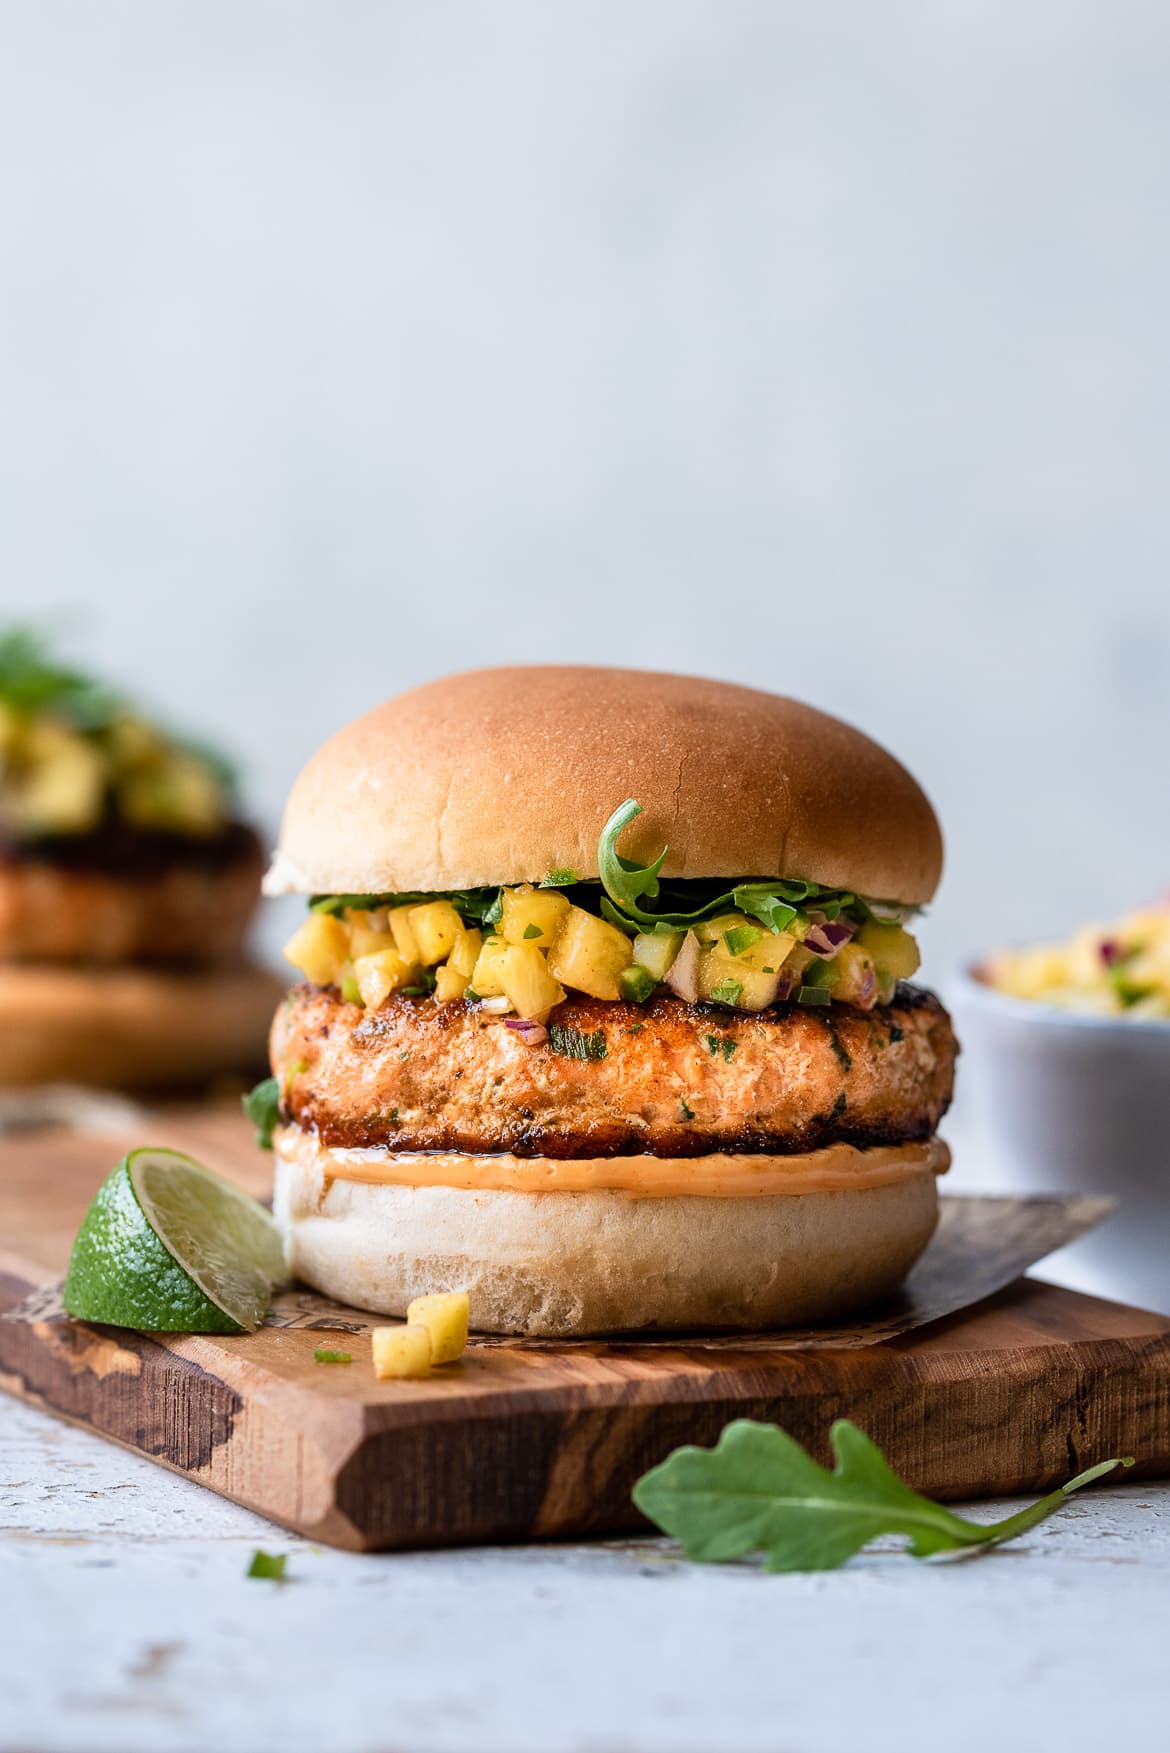 Cook Salmon Burger Easily at Home